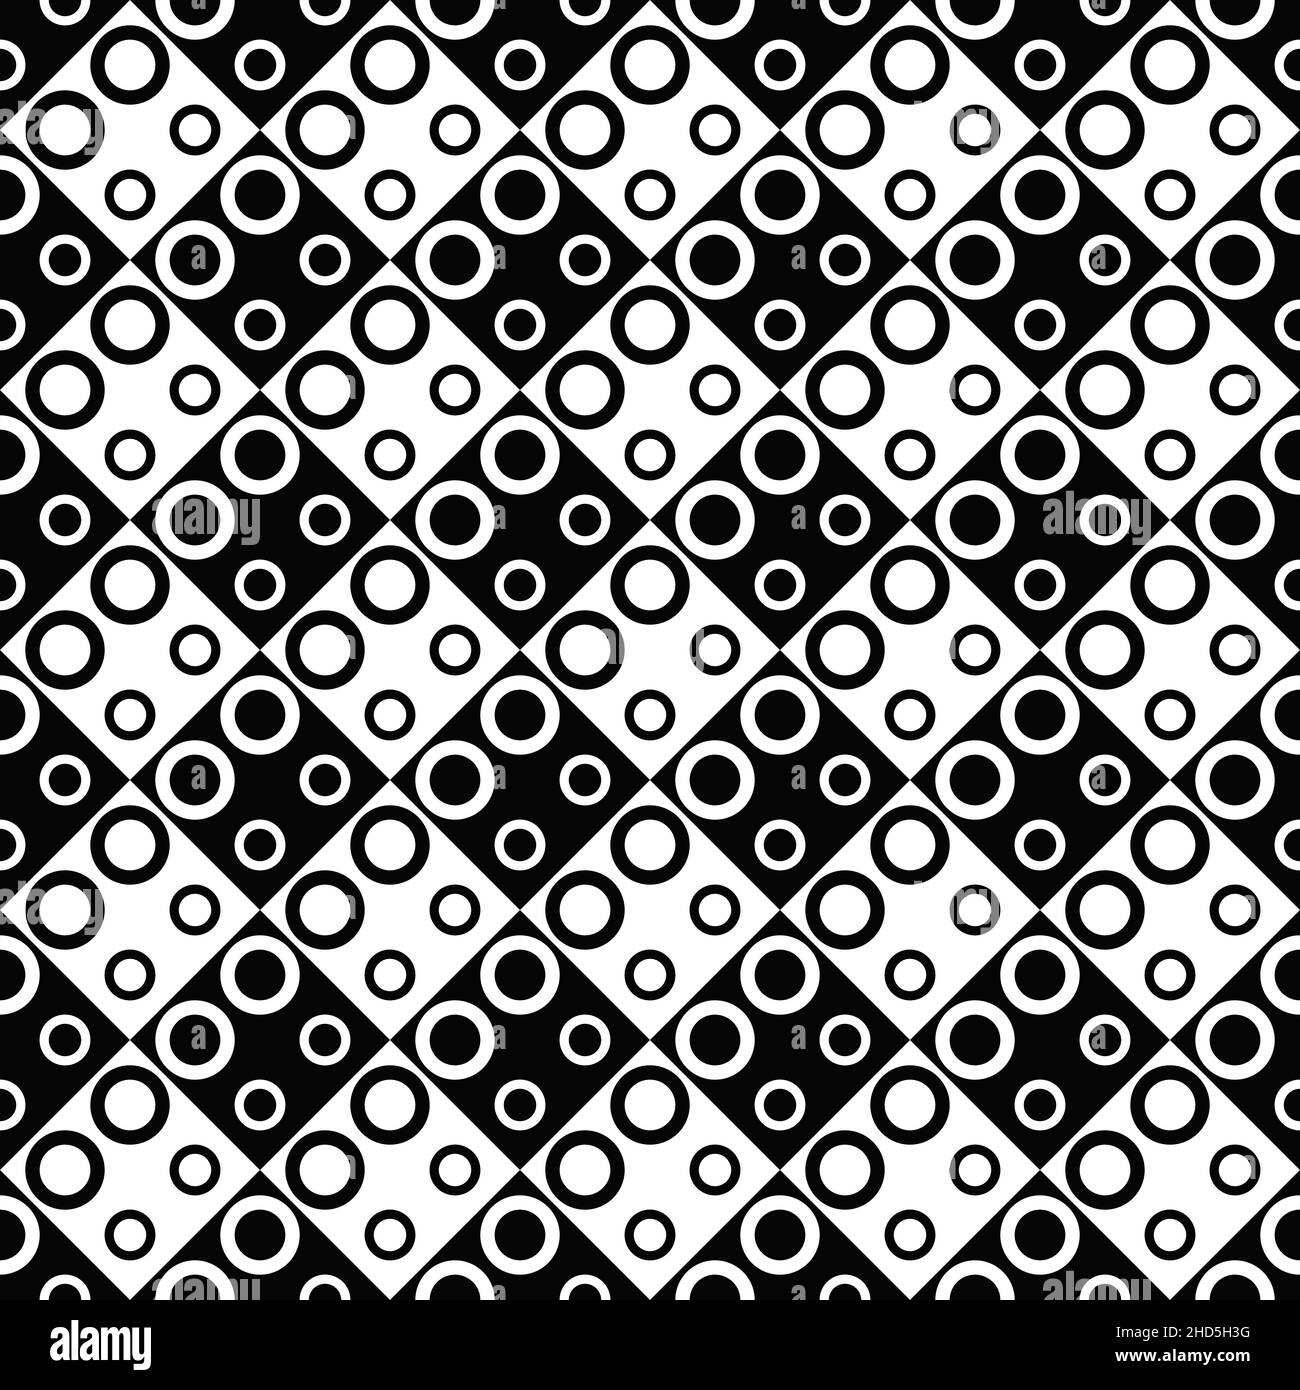 Geometrical black and white seamless circle pattern background Stock Vector